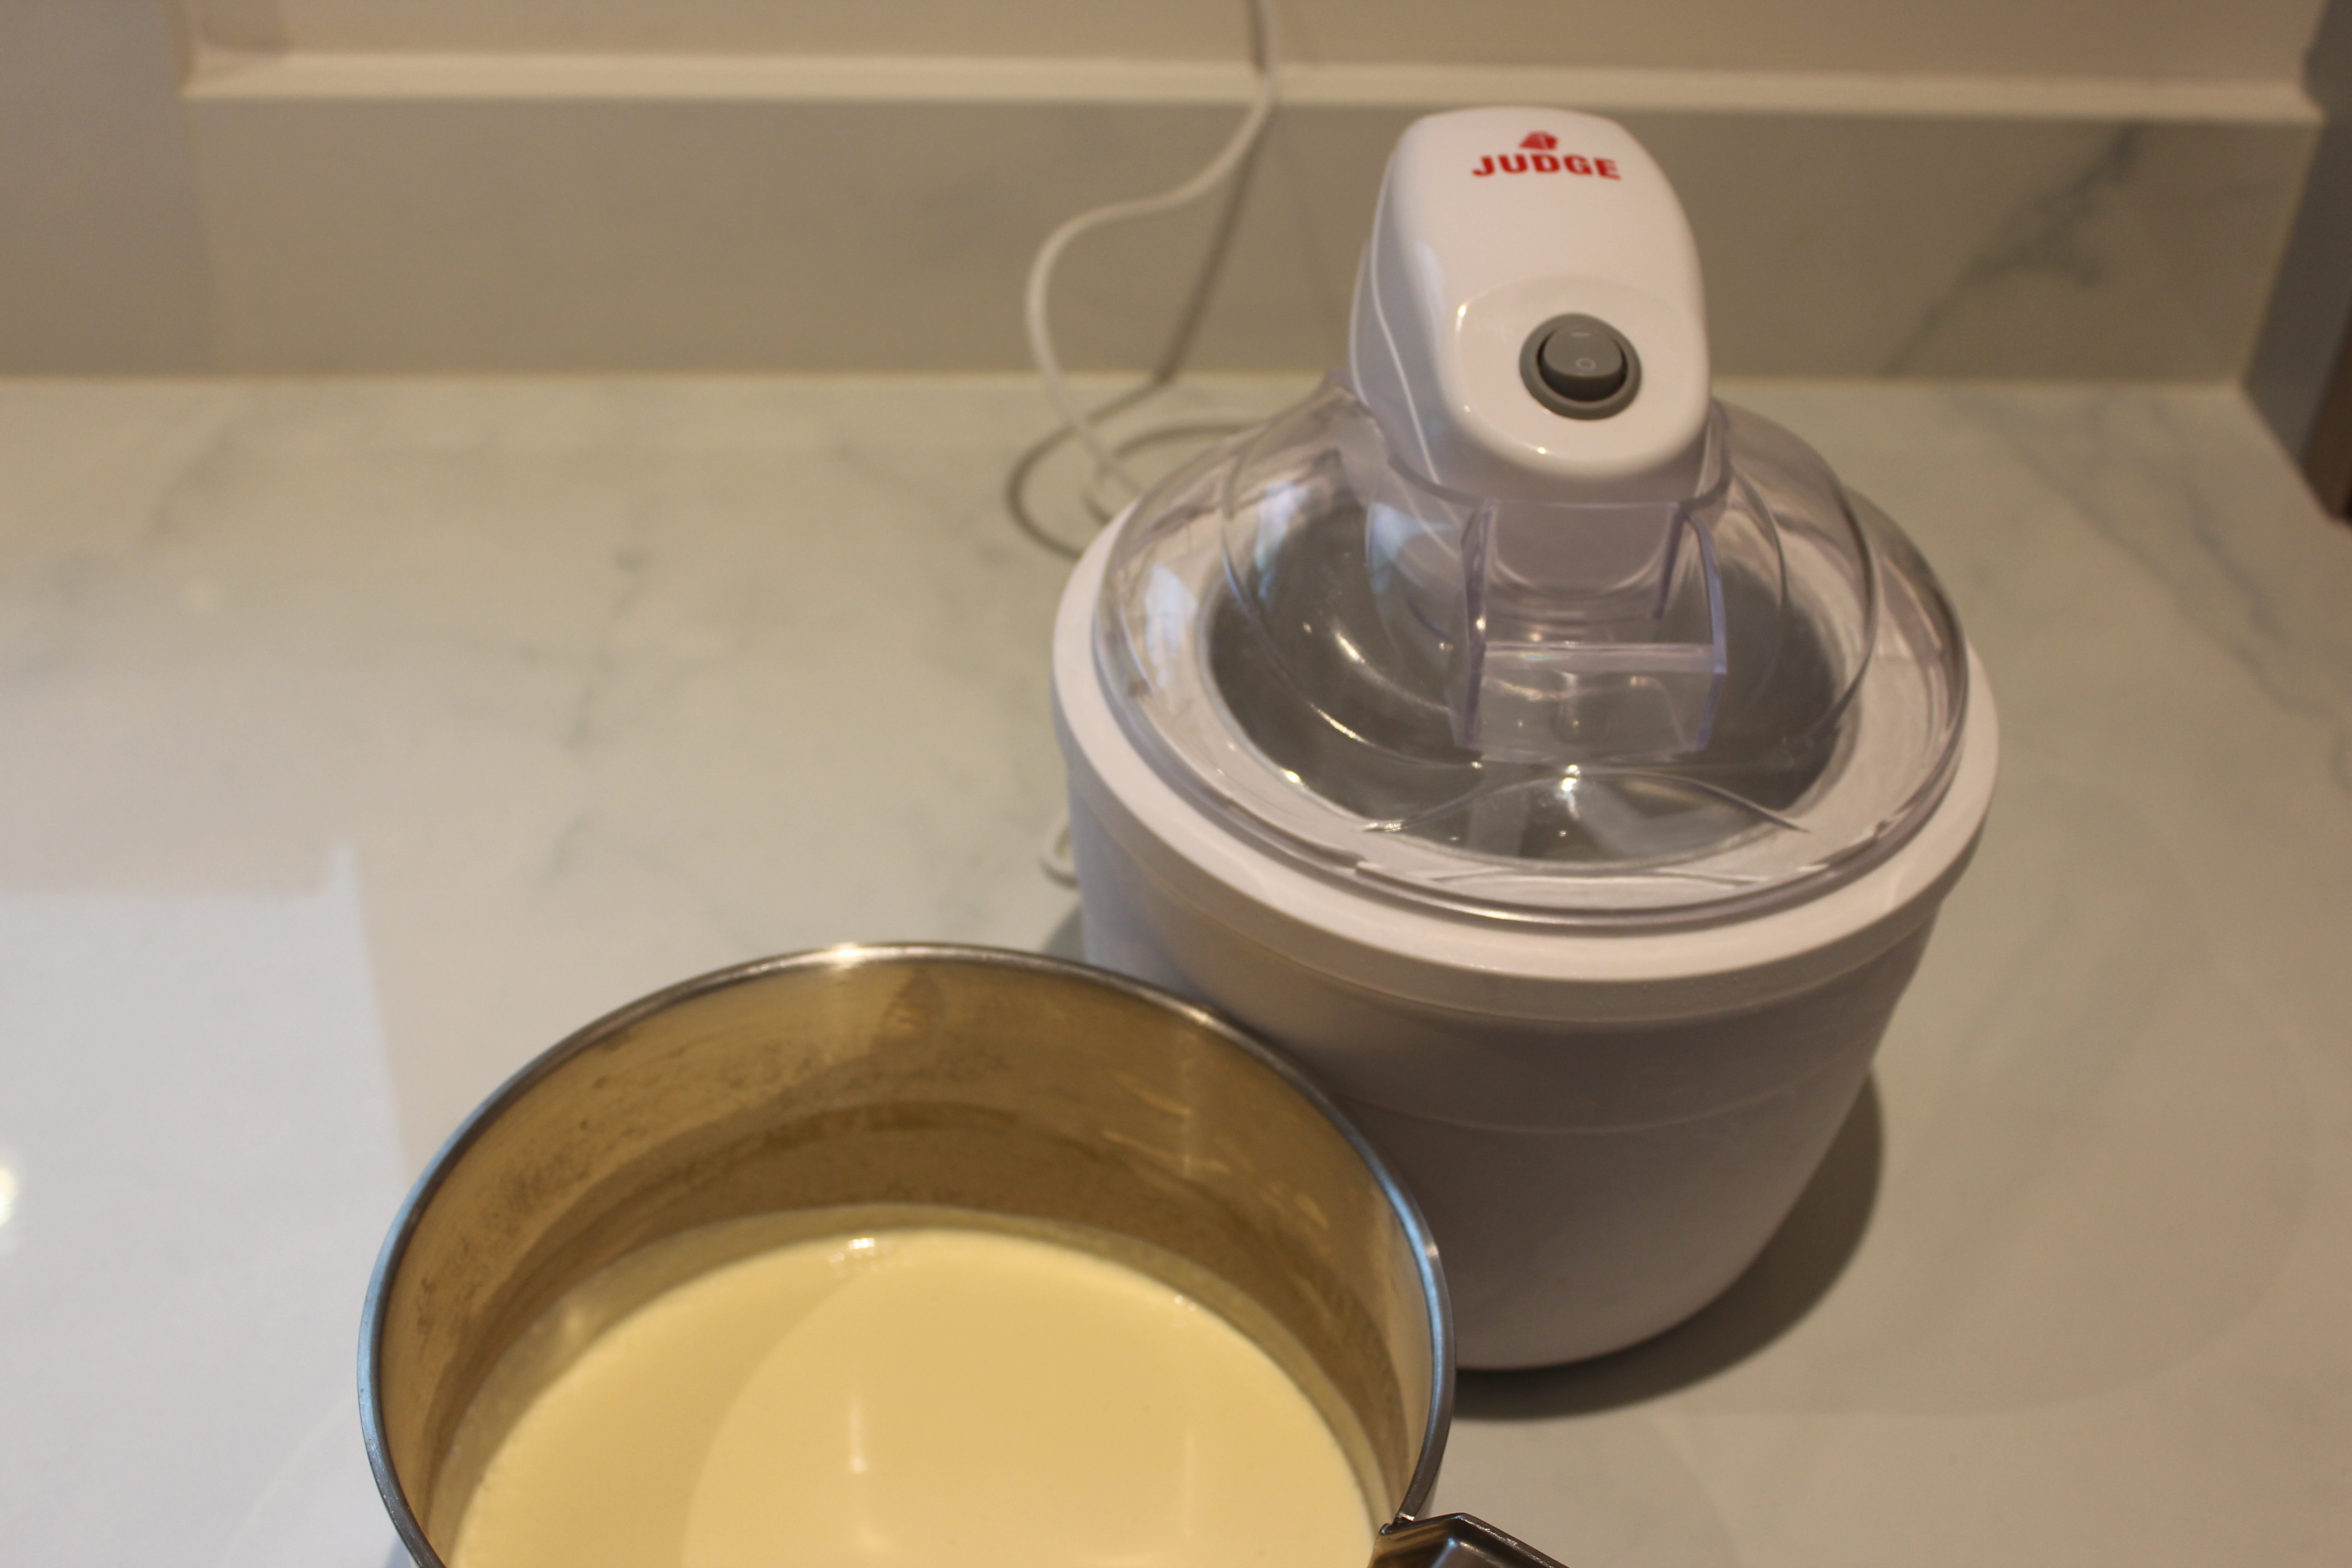 Judge Ice Cream Maker JEA57 next to a bowl of mixture.